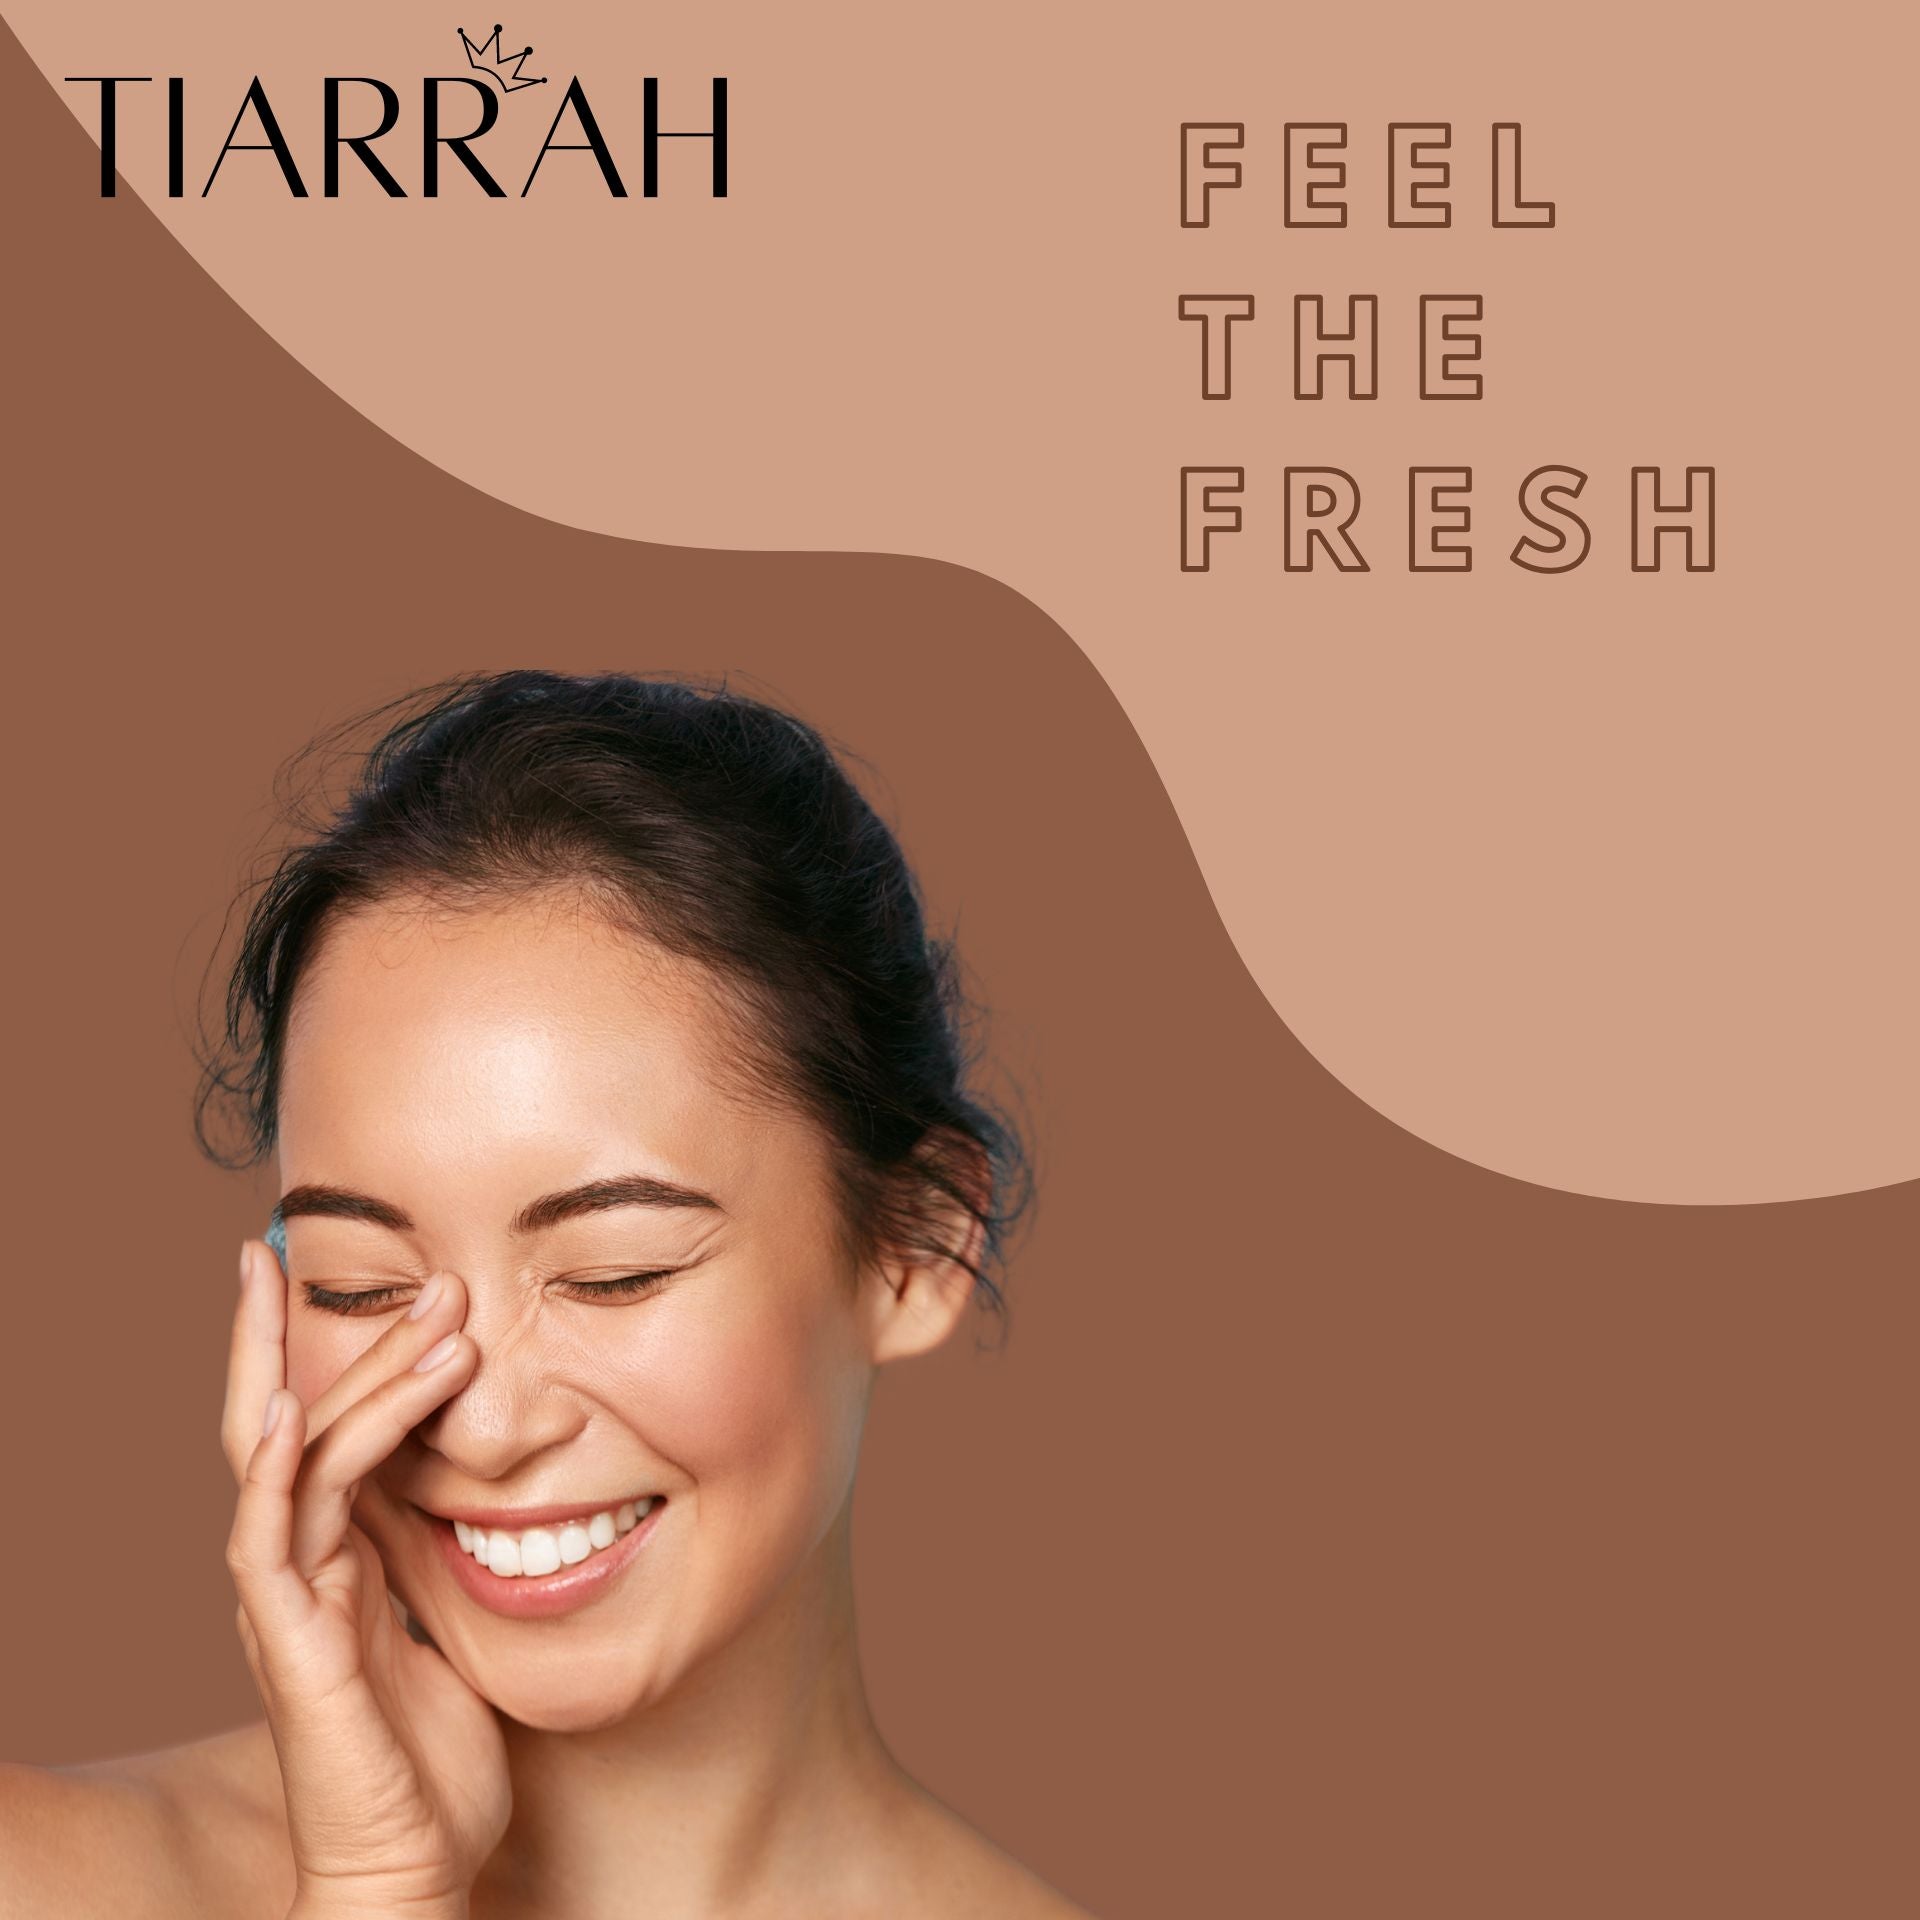 Luxury Chocolate Face Mask by Tiarrah: Organic, Non-Toxic - The Luxury Bath and Body Care Shop